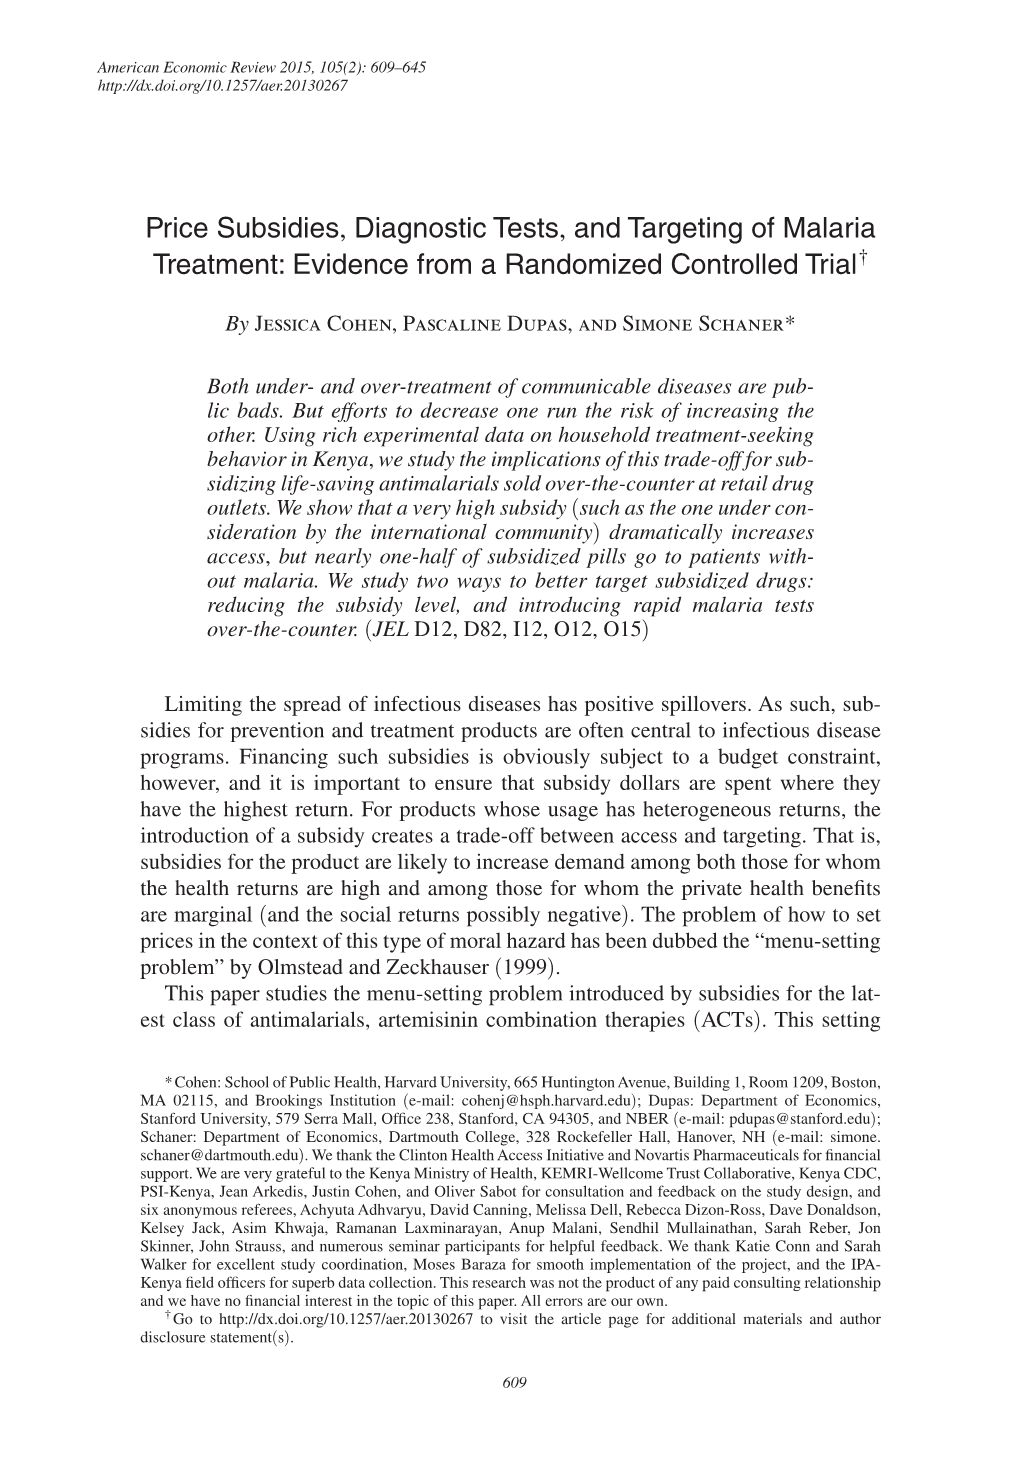 Price Subsidies, Diagnostic Tests, and Targeting of Malaria Treatment: Evidence from a Randomized Controlled Trial †